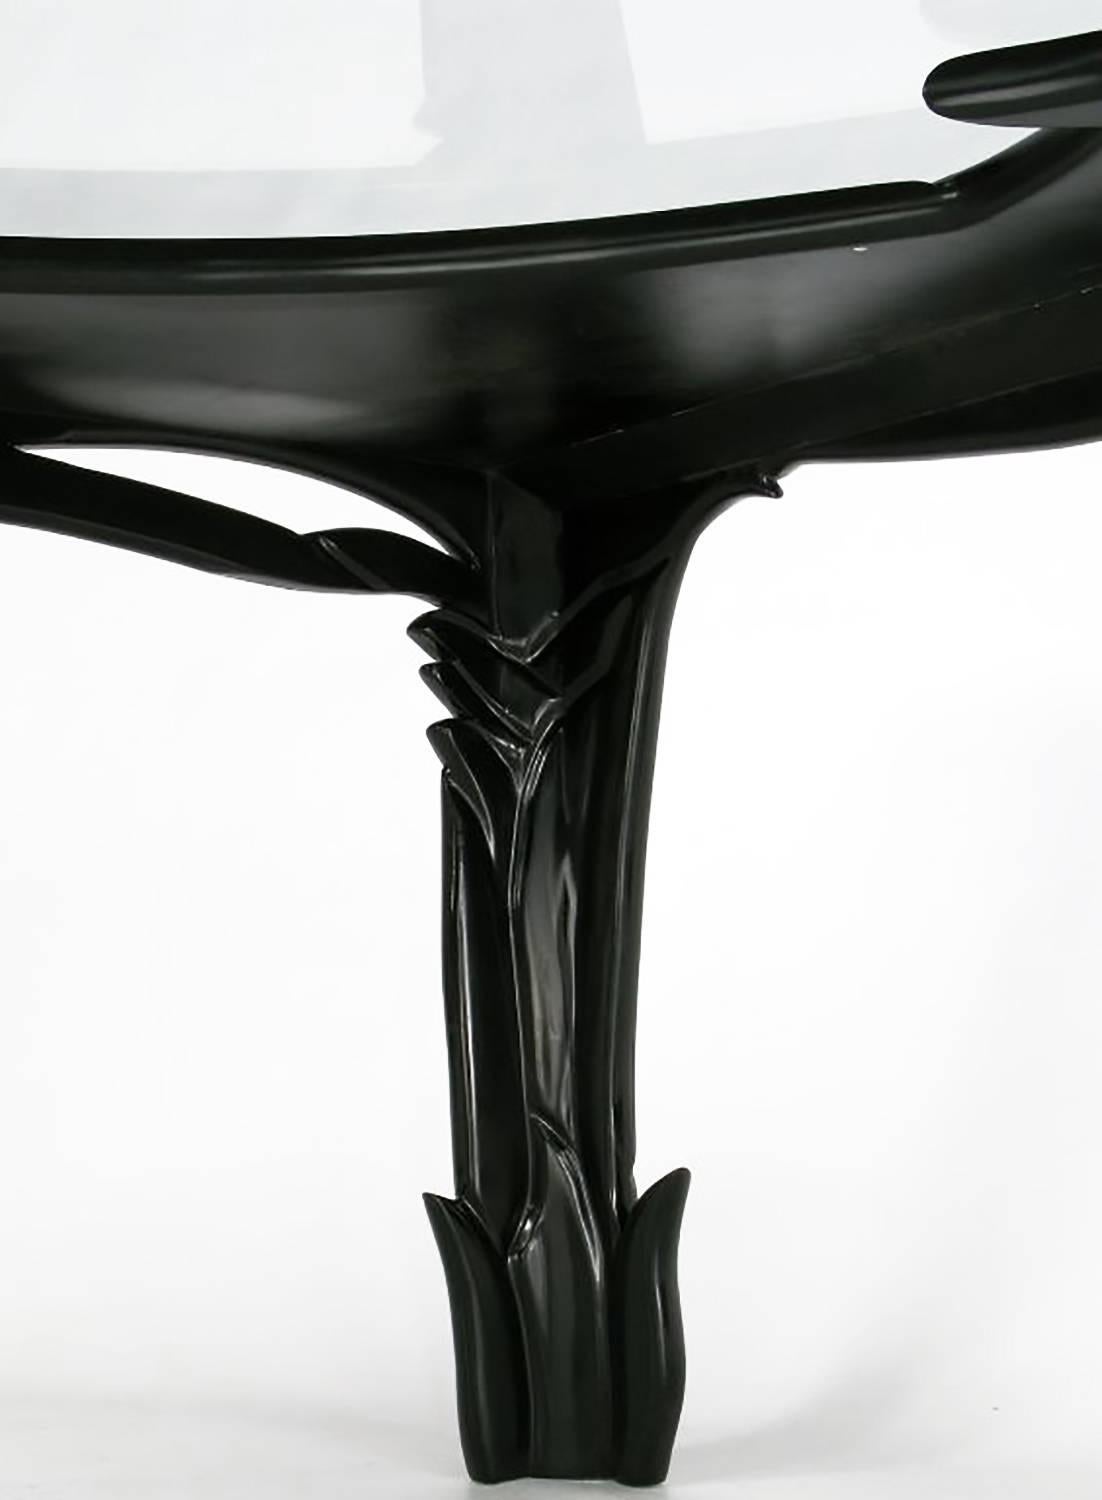 Gesso Incredible Phyllis Morris Carved Wood and Black Lacquer Dining Table For Sale